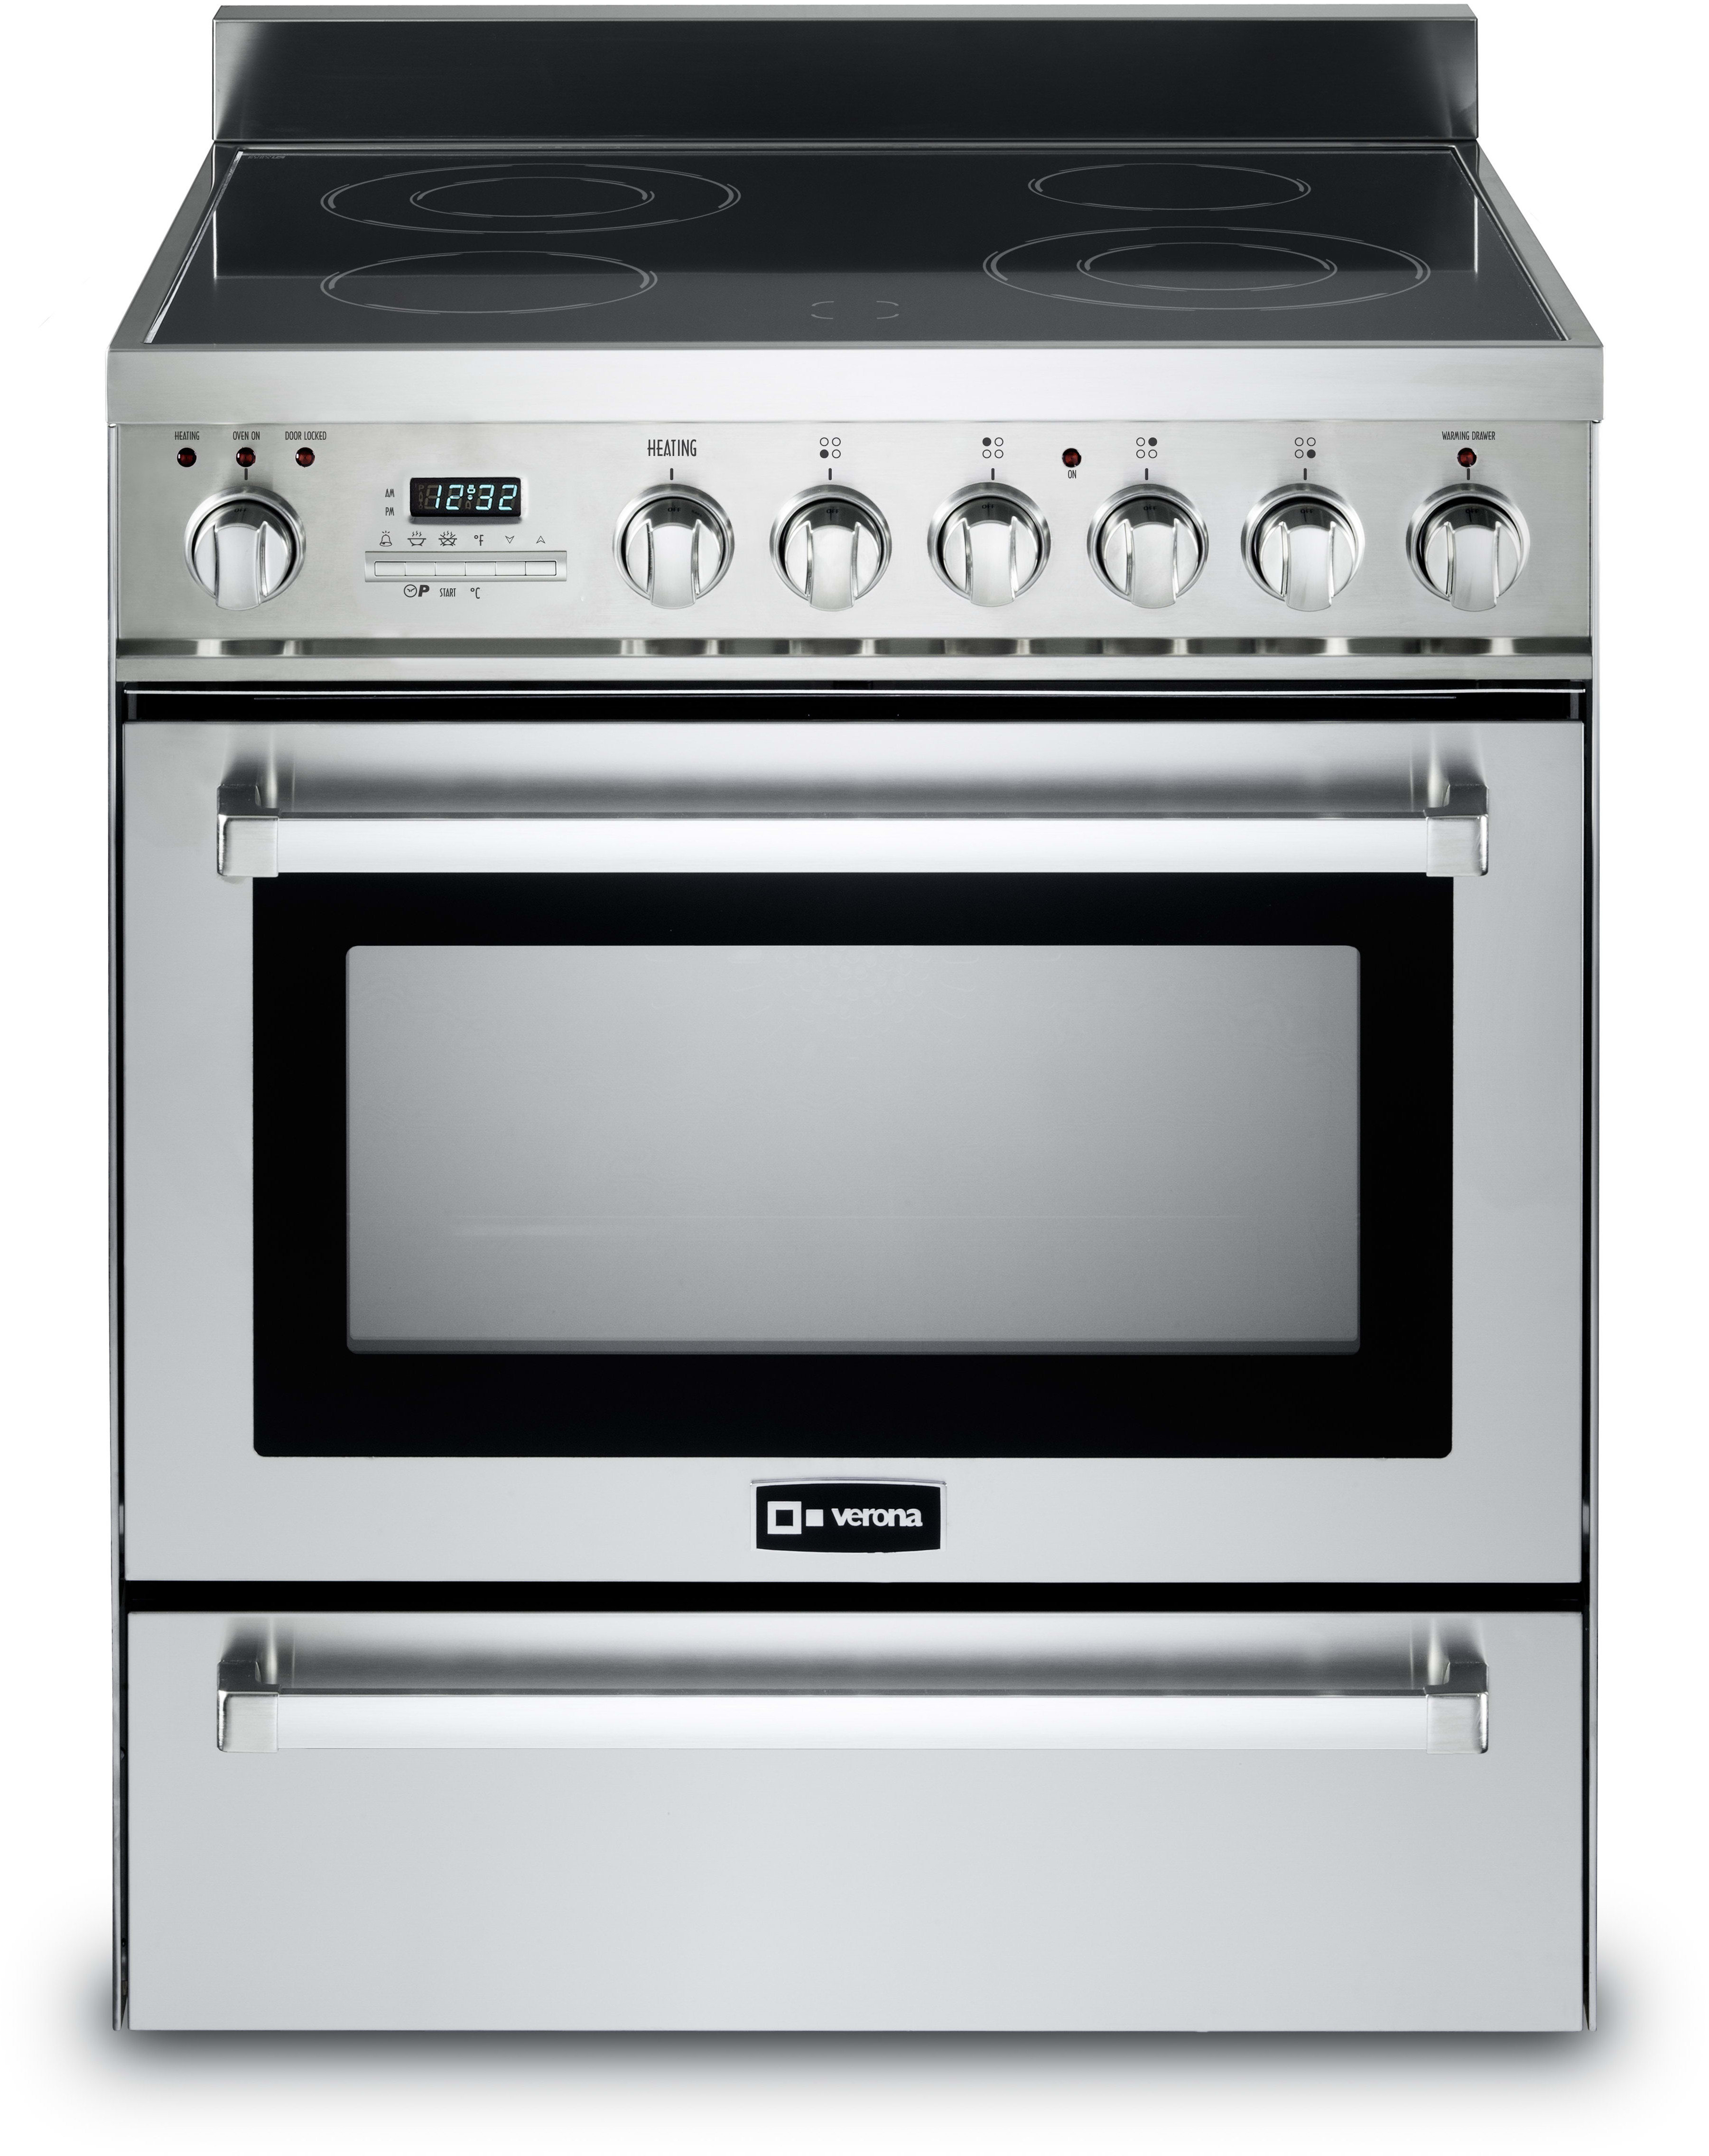 verona-vefsee304pss-30-inch-freestanding-electric-range-with-4-radiant